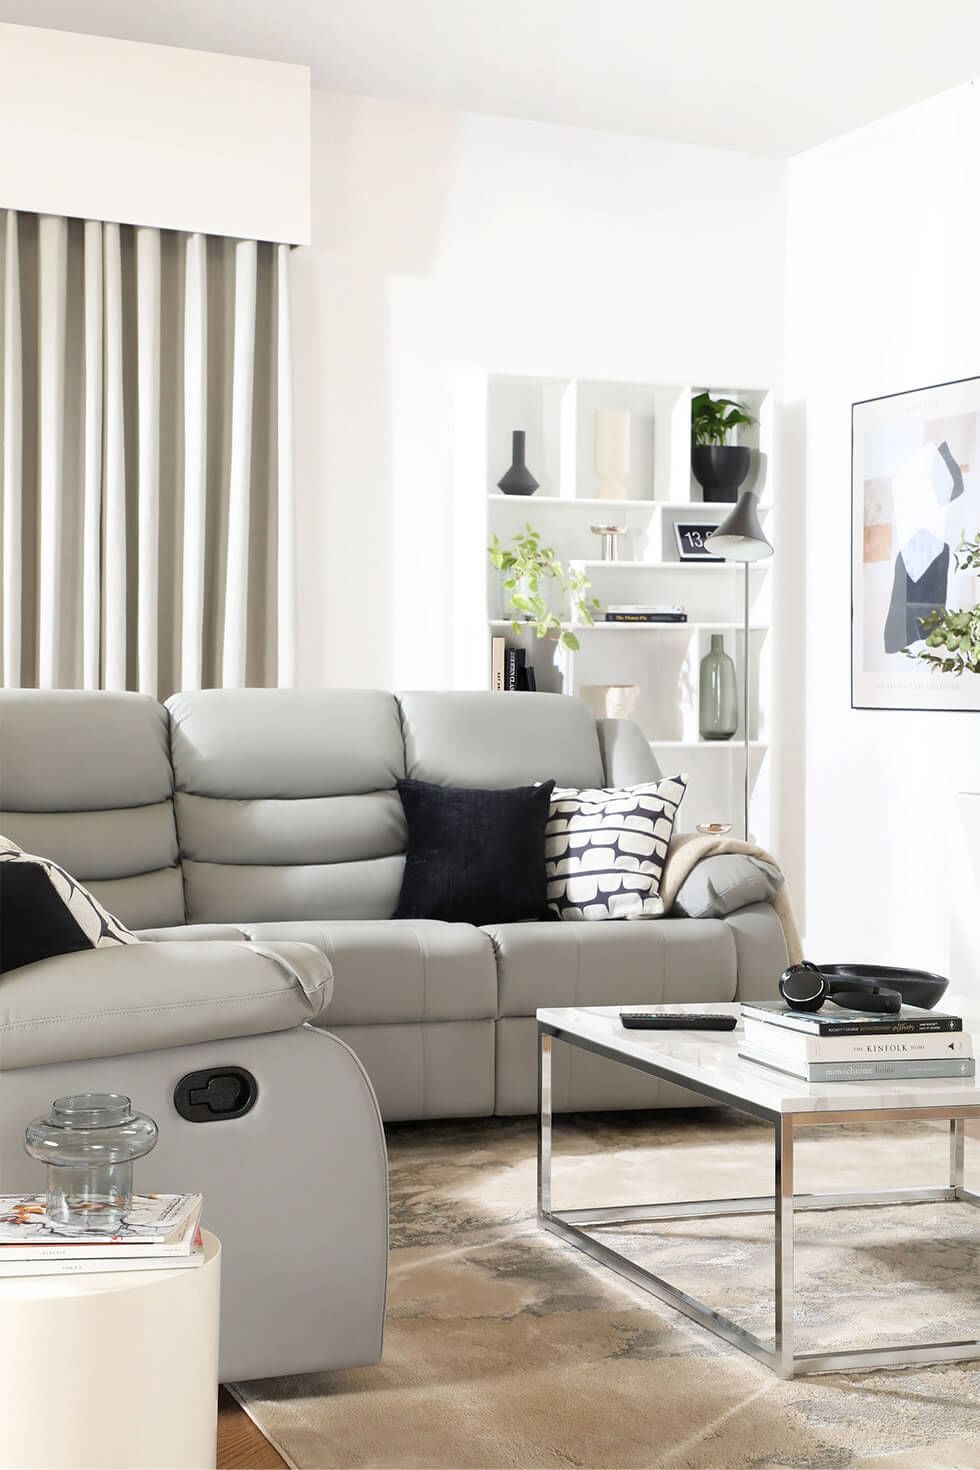 Contemporary living room with a light grey recliner sofa and neutral accents